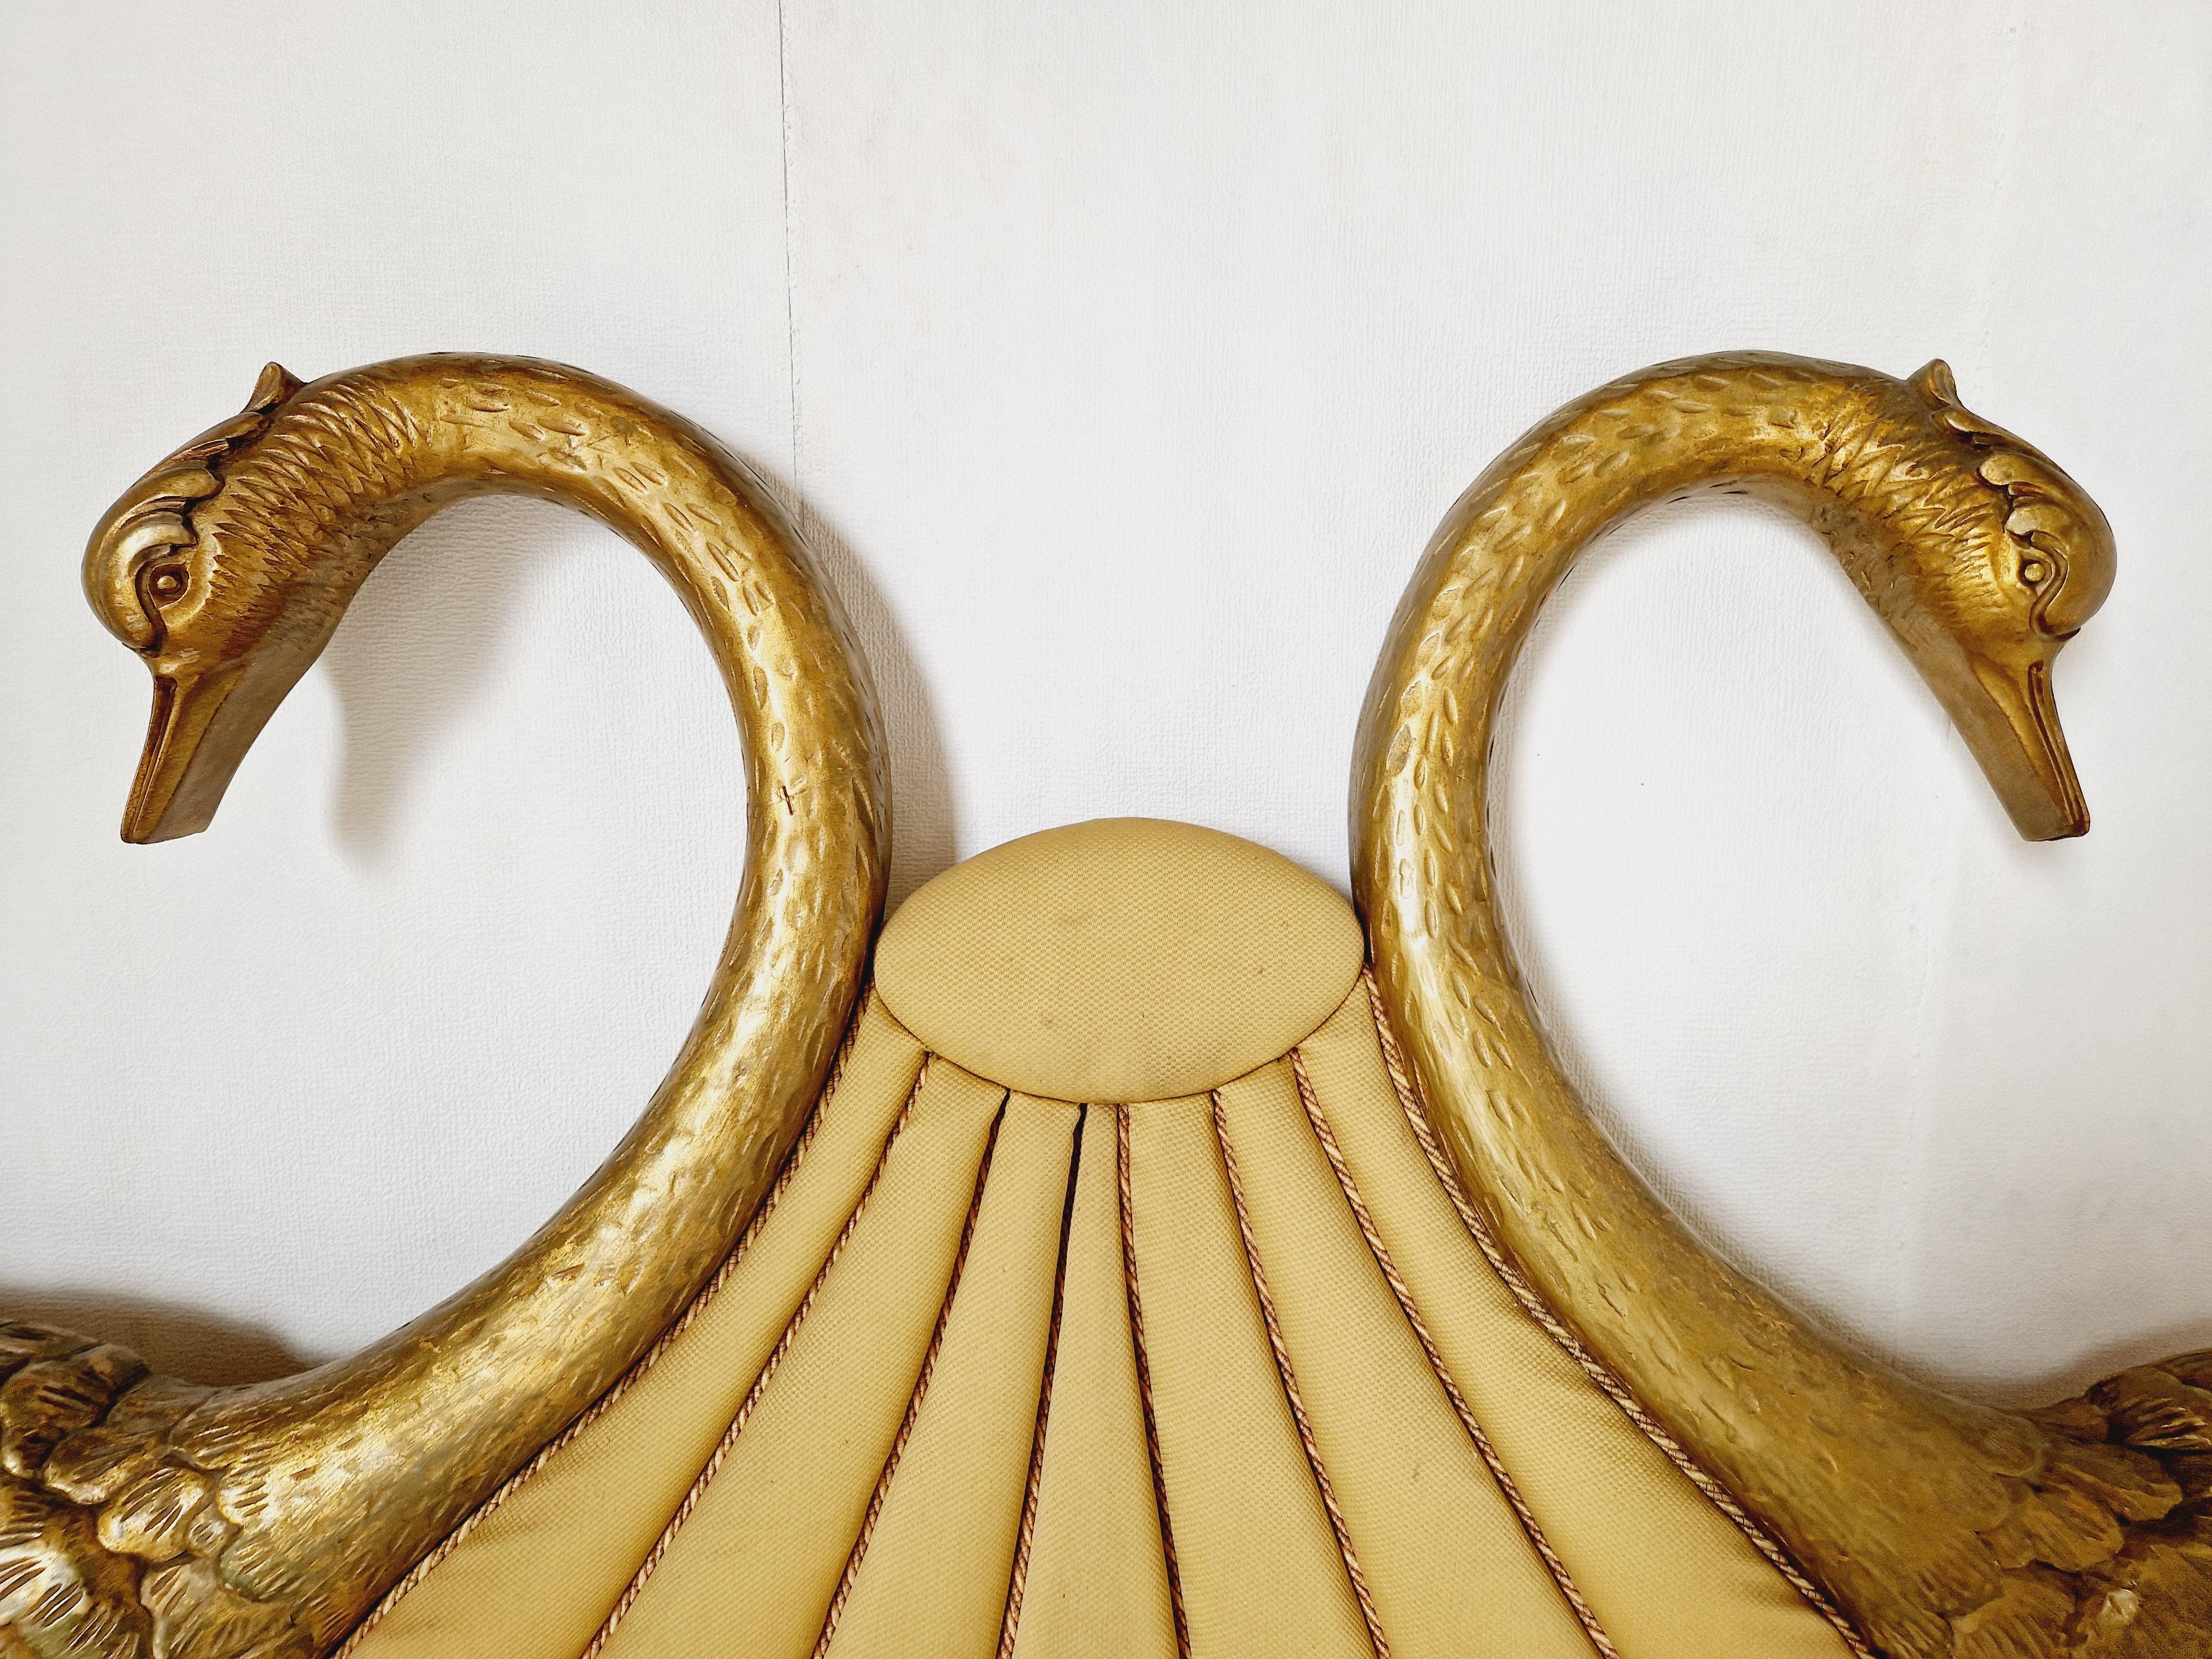 
Enhance the look of your bedroom with this WOW Factor vintage Art Deco bed headboard from Nube. Crafted from high-quality wood, this headboard has 2 Large Swans painted in a beautiful gold finish that adds a touch of glamour to any space. Measuring